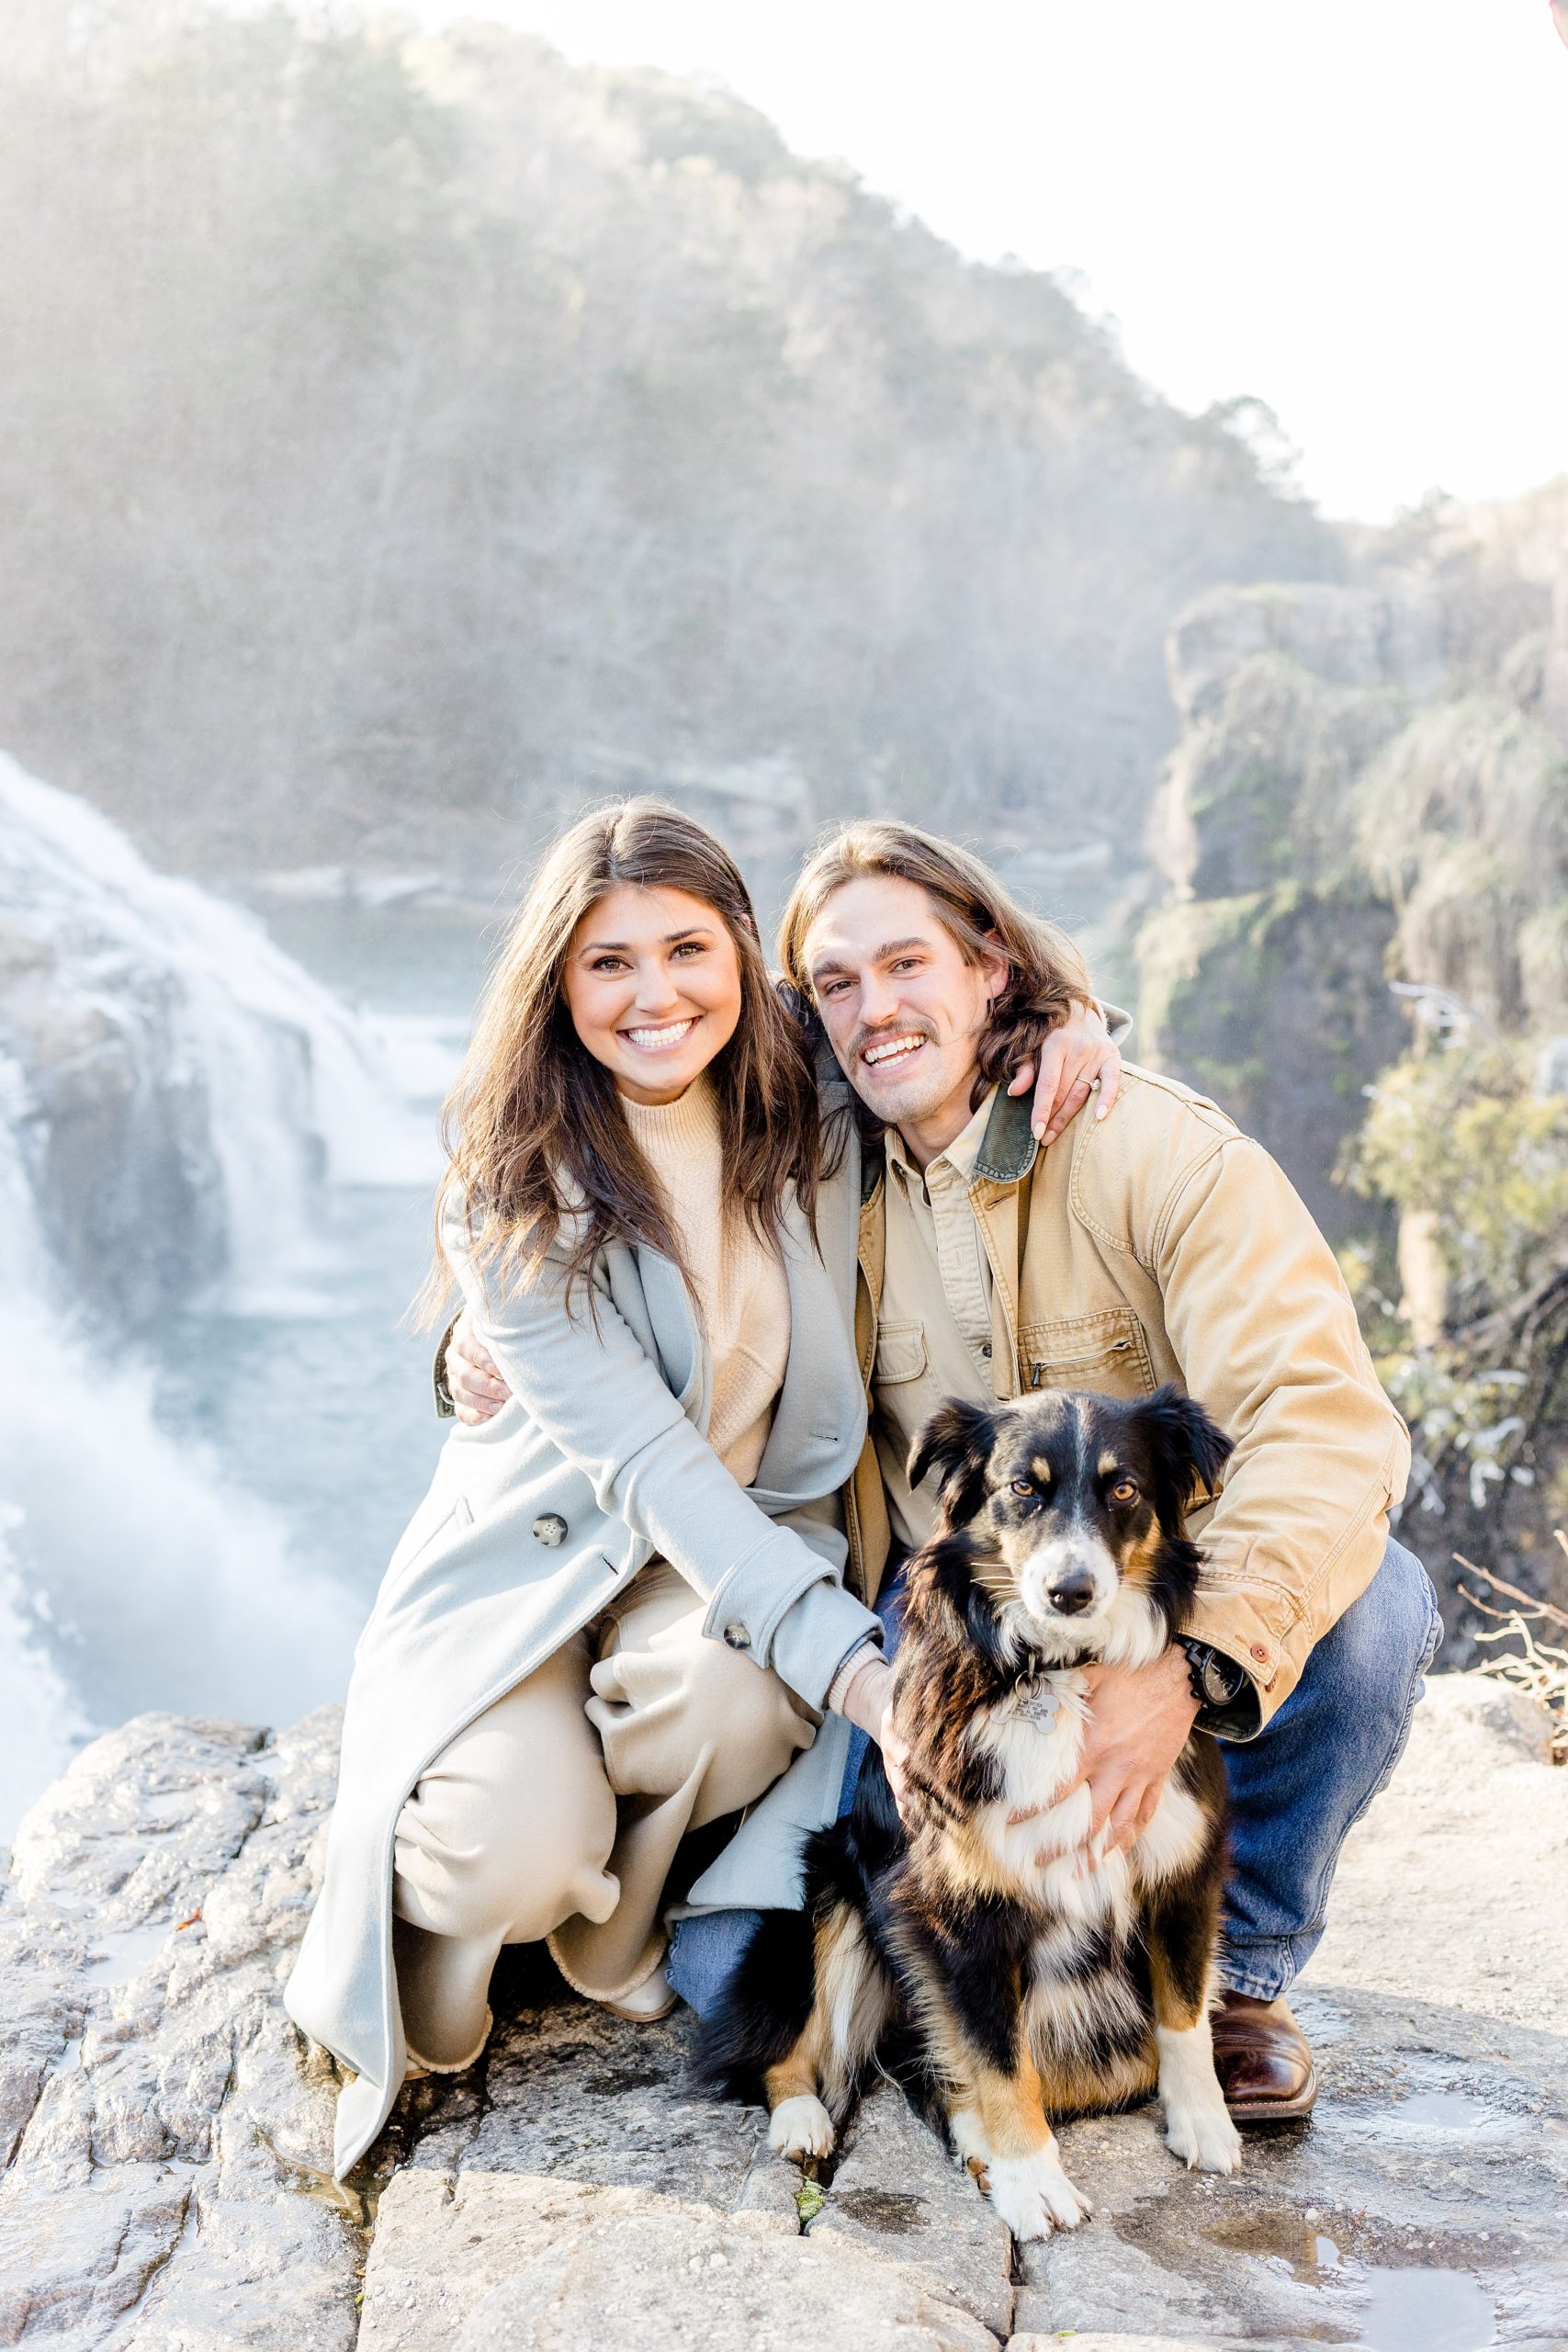 Chase & Channing's Waterfall Proposal